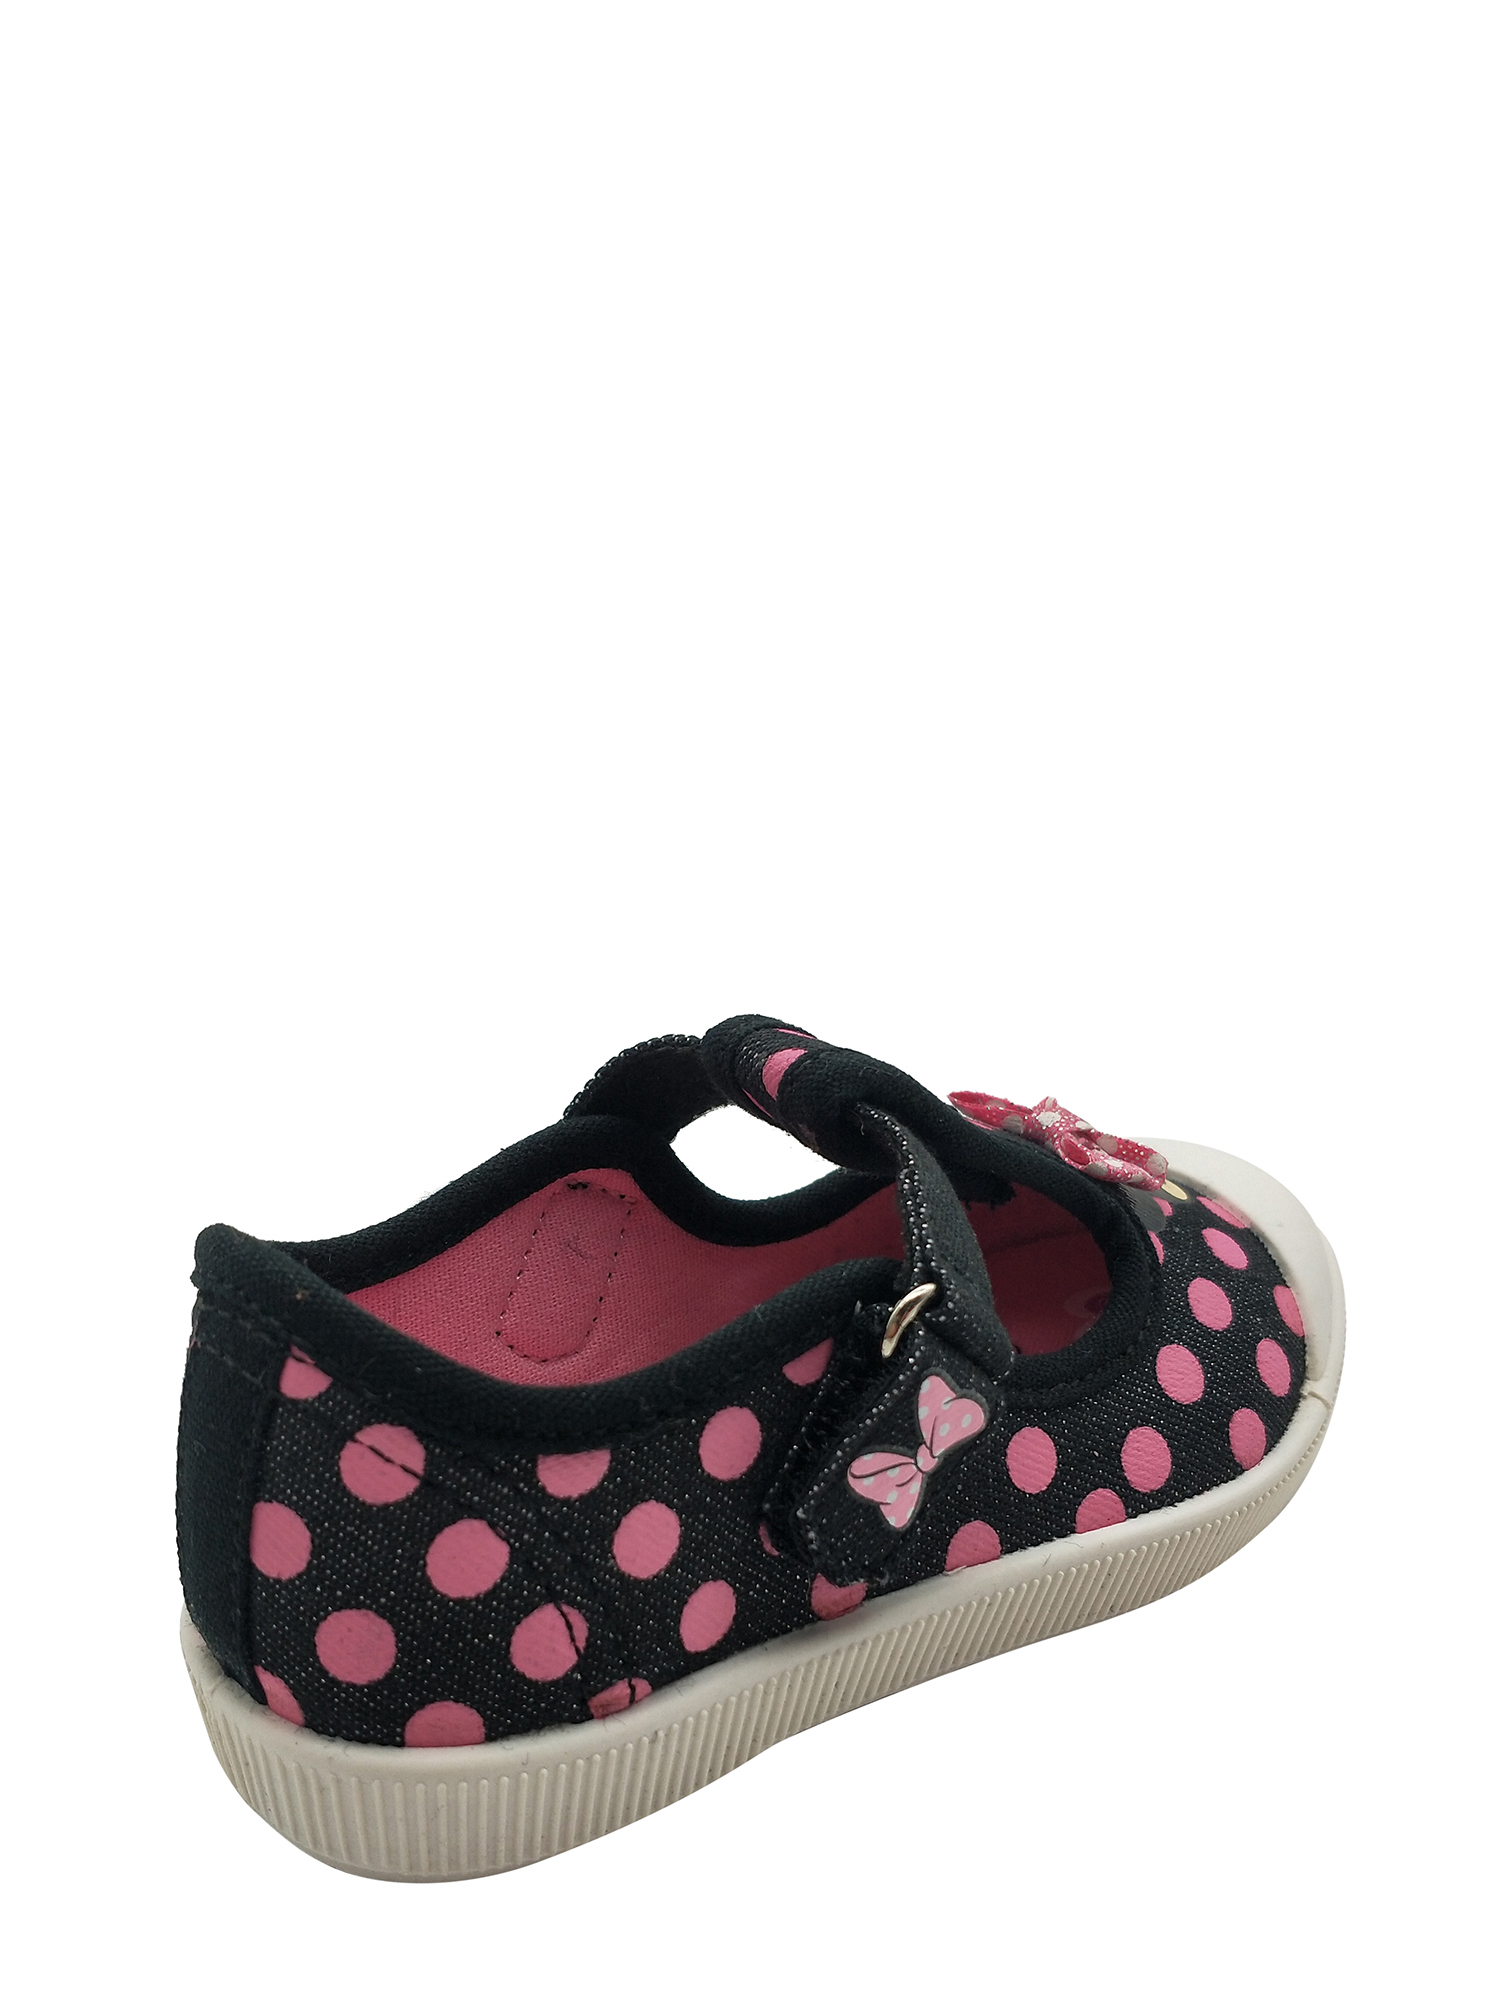 Minnie Mouse Polka Dot T-Strap Casual Shoe (Toddler Girls) - image 3 of 6